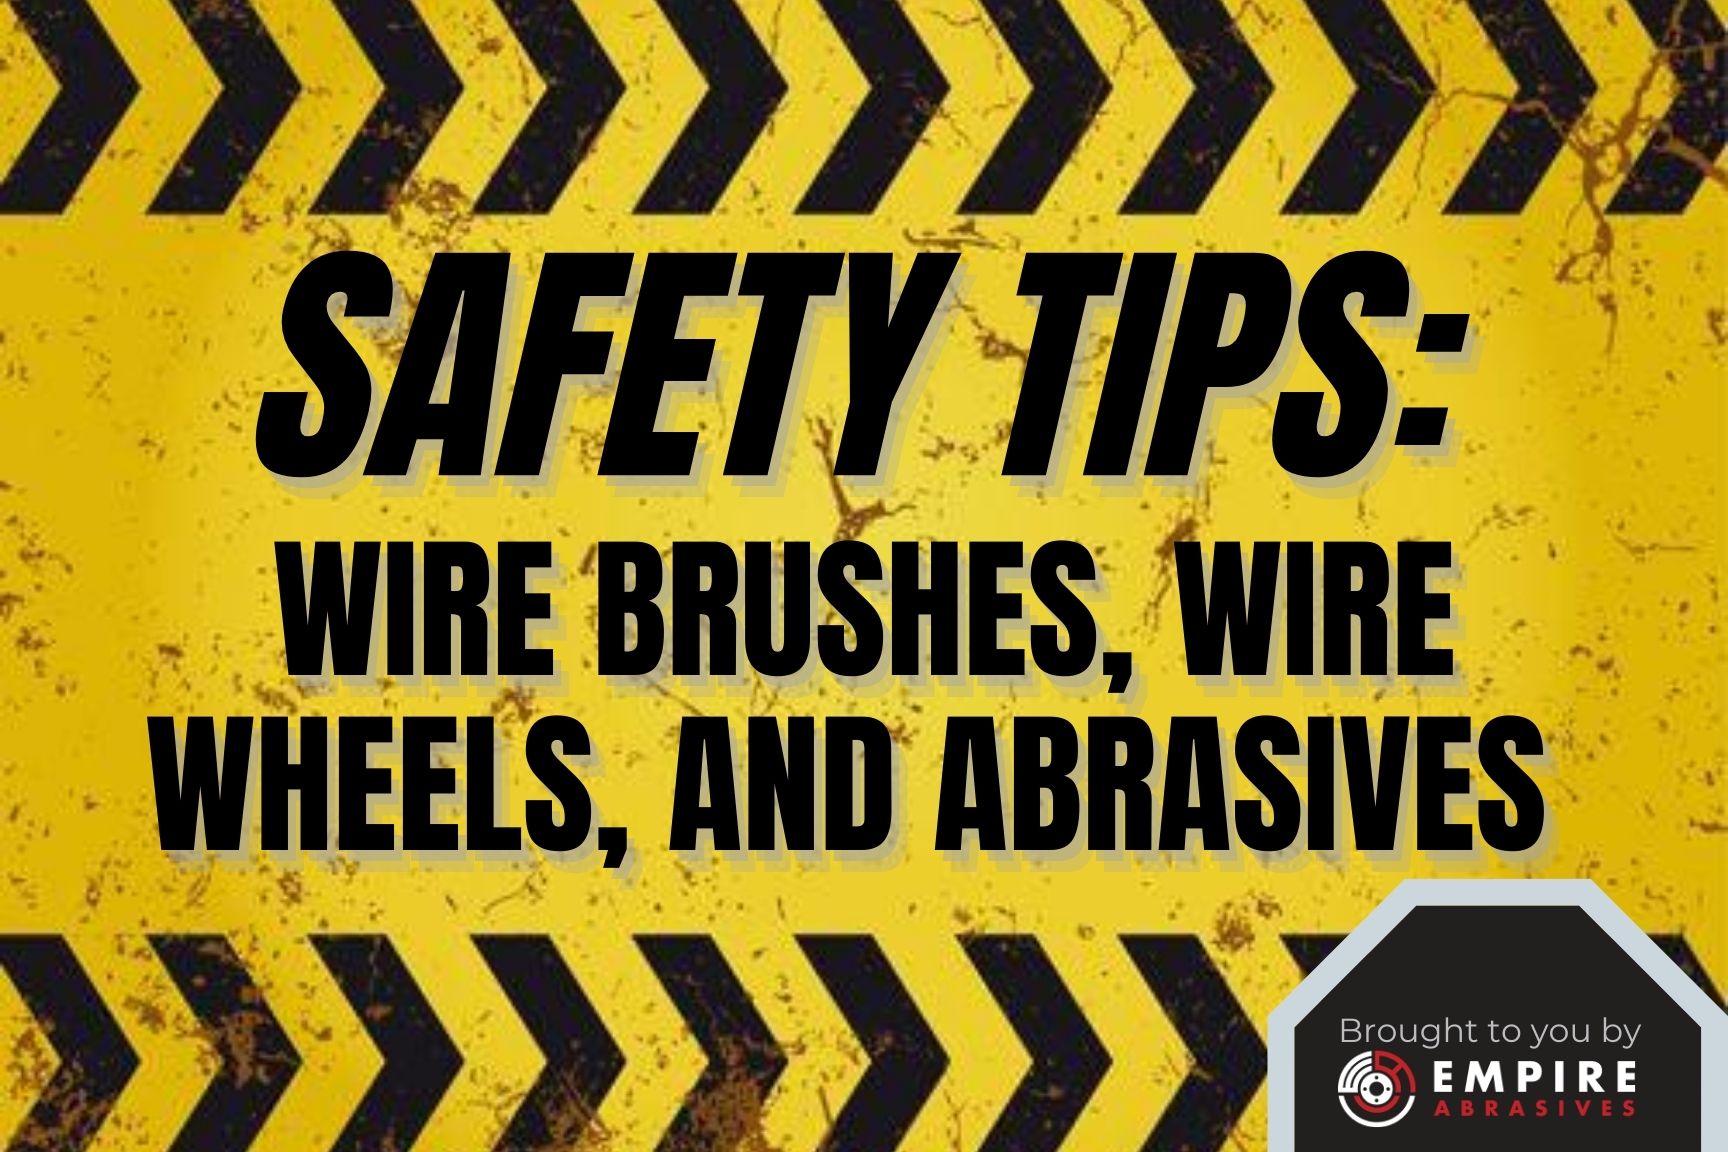 Safety Tips - Wire Brushes, Wire Wheels, and Abrasive Safety